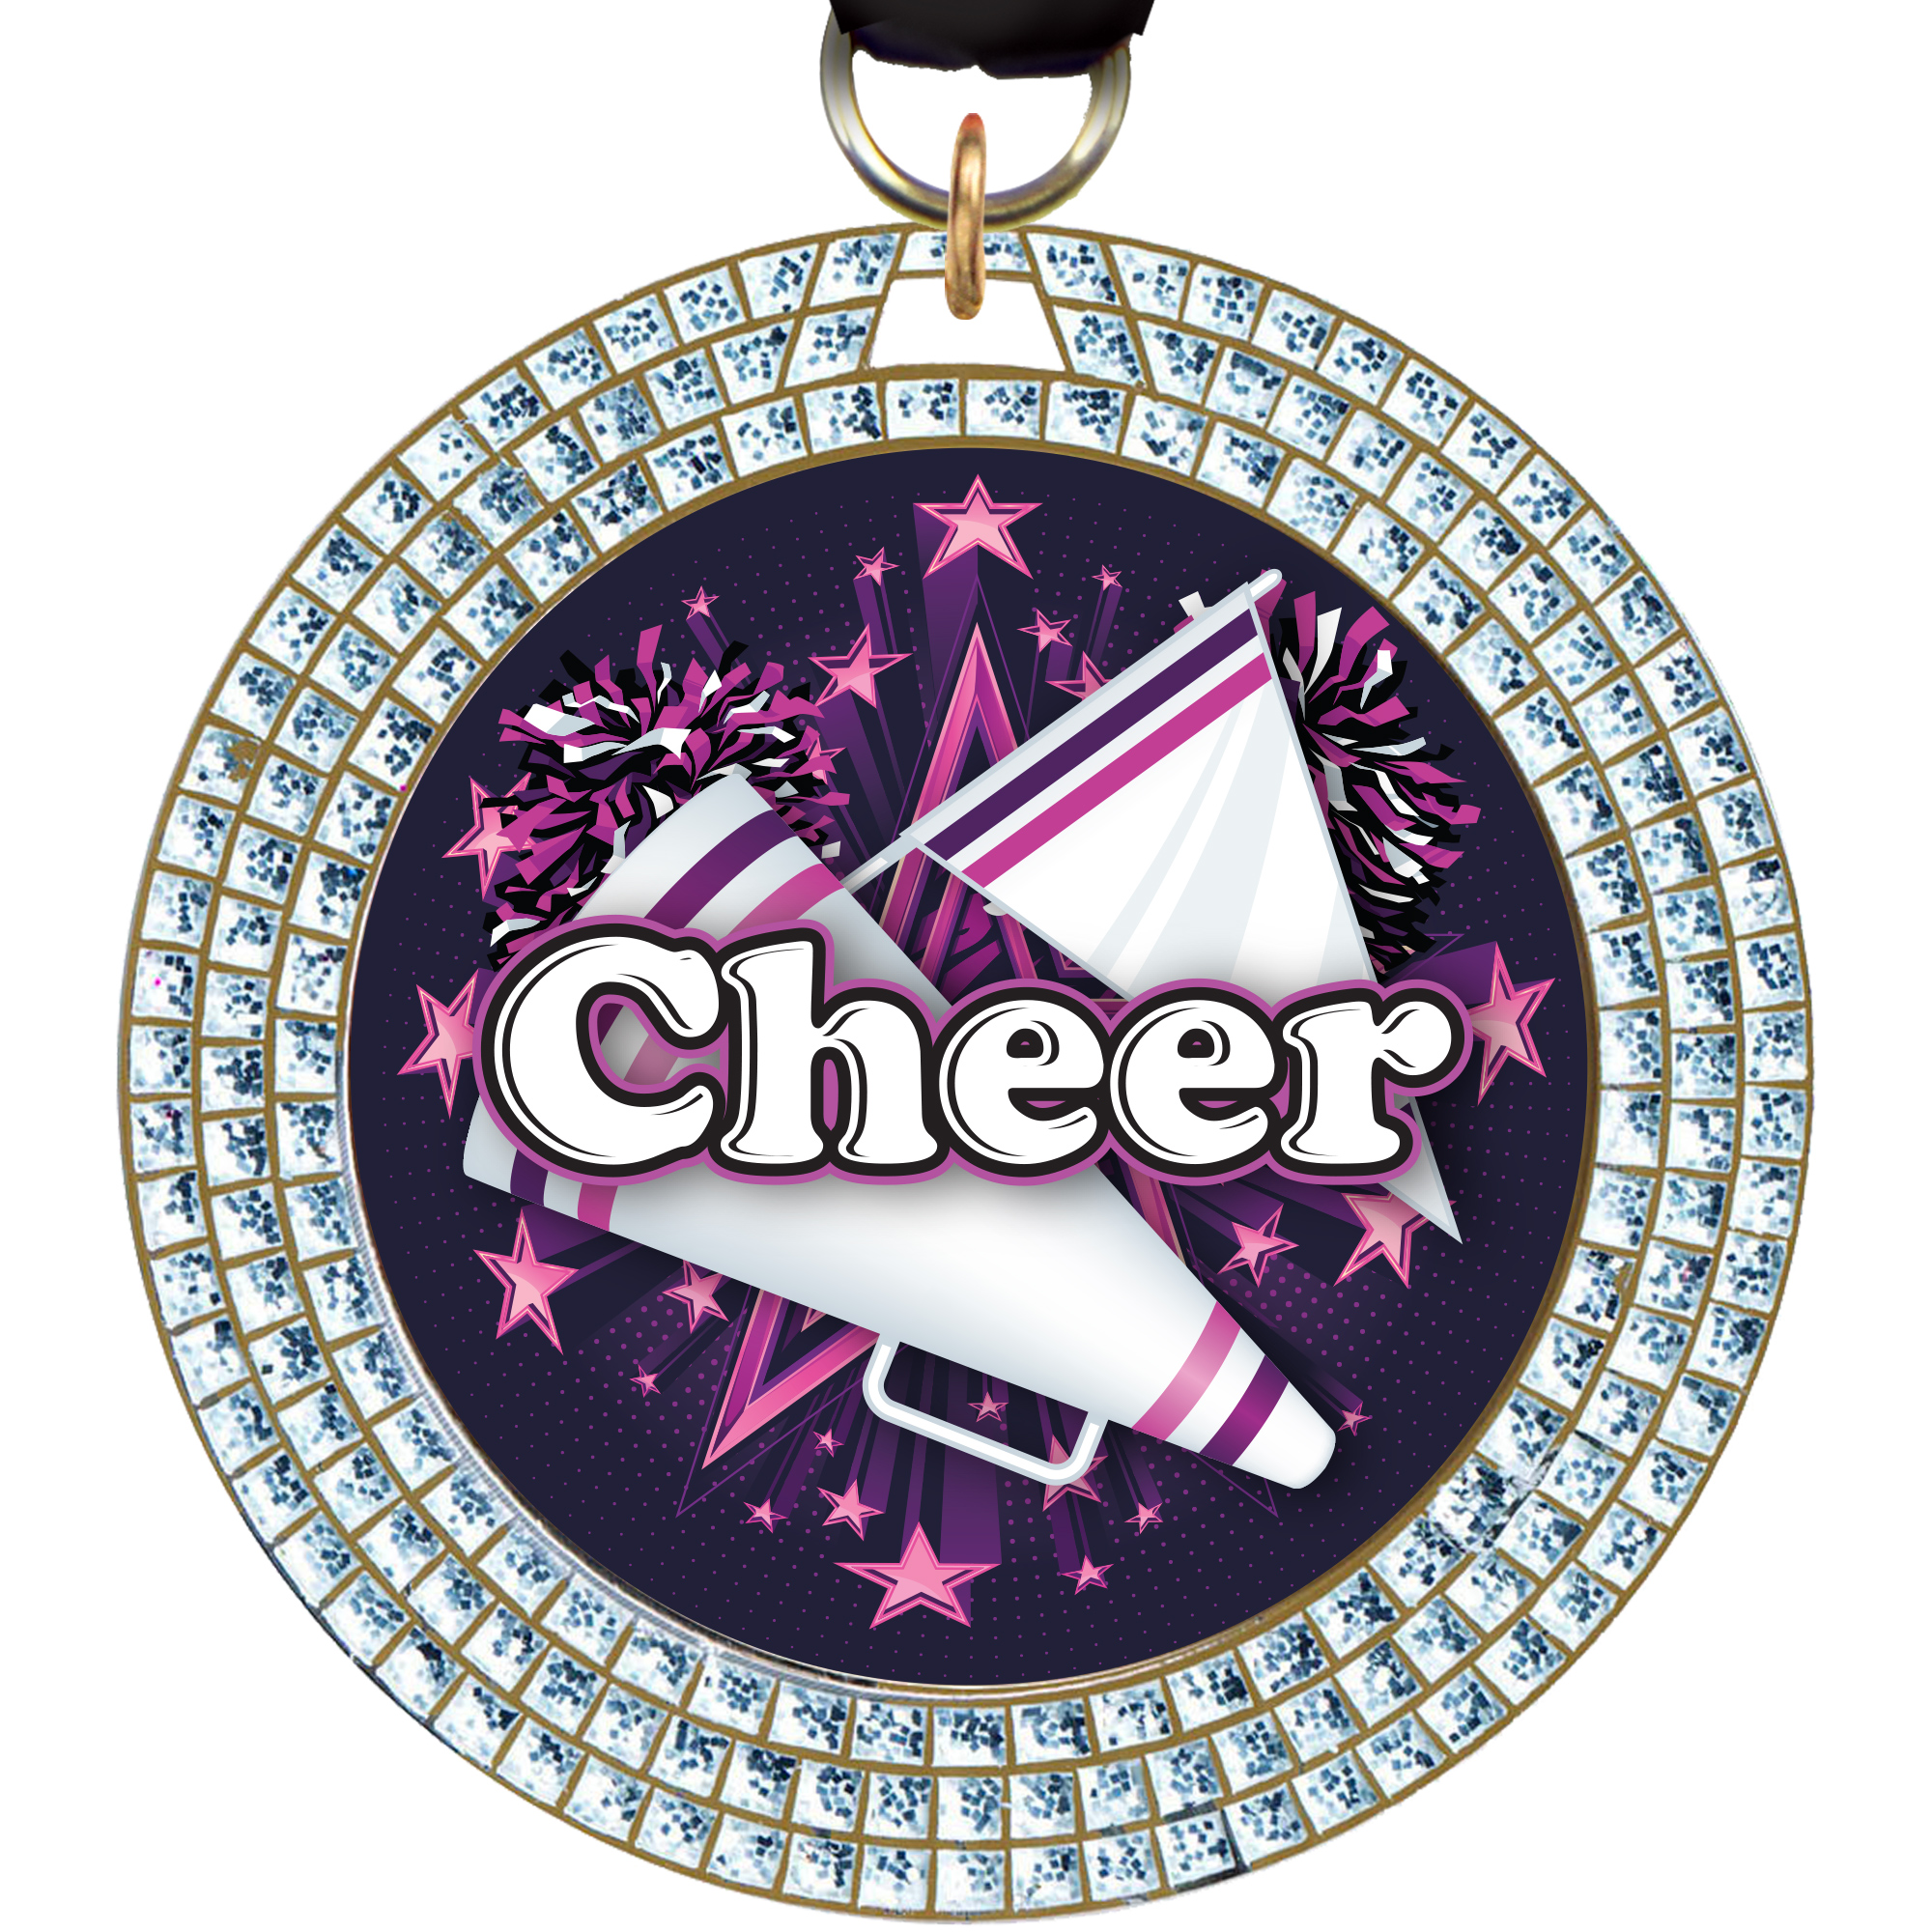 Custom Silver 3D Dome Triple Sparkle Insert Medals